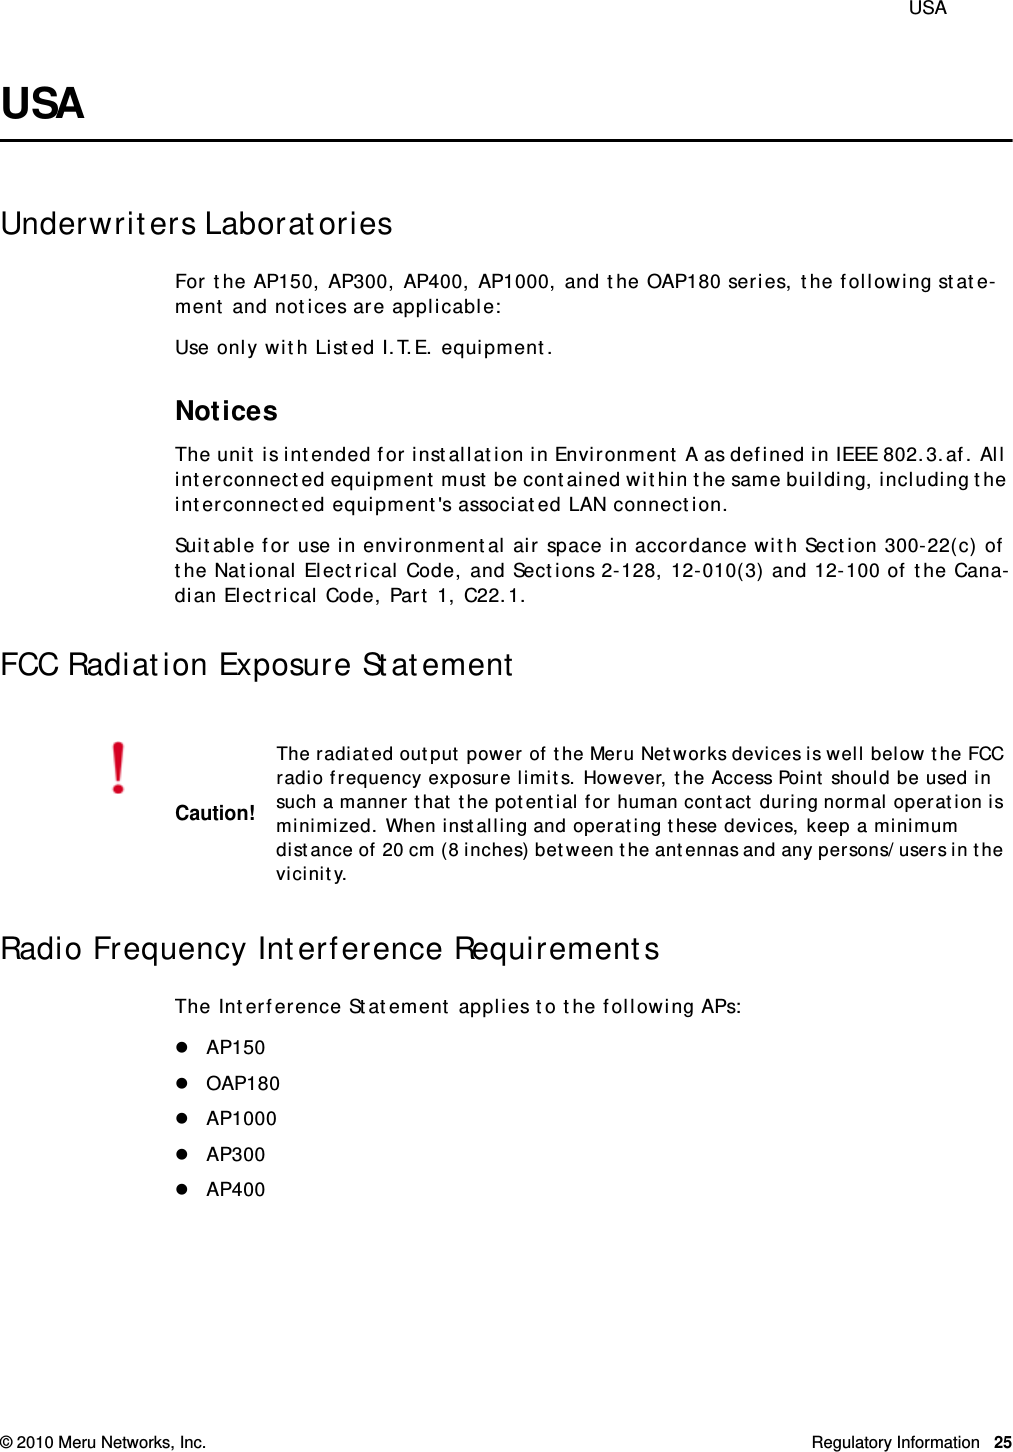  USA © 2010 Meru Networks, Inc. Regulatory Information 25USAUnderwriters LaboratoriesFor the AP150, AP300, AP400, AP1000, and the OAP180 series, the following state-ment and notices are applicable:Use only with Listed I.T.E. equipment.NoticesThe unit is intended for installation in Environment A as defined in IEEE 802.3.af. All interconnected equipment must be contained within the same building, including the interconnected equipment&apos;s associated LAN connection.Suitable for use in environmental air space in accordance with Section 300-22(c) of the National Electrical Code, and Sections 2-128, 12-010(3) and 12-100 of the Cana-dian Electrical Code, Part 1, C22.1.FCC Radiation Exposure StatementRadio Frequency Interference RequirementsThe Interference Statement applies to the following APs:AP150OAP180AP1000AP300AP400Caution!The radiated output power of the Meru Networks devices is well below the FCC radio frequency exposure limits. However, the Access Point should be used in such a manner that the potential for human contact during normal operation is minimized. When installing and operating these devices, keep a minimum distance of 20 cm (8 inches) between the antennas and any persons/users in the vicinity.